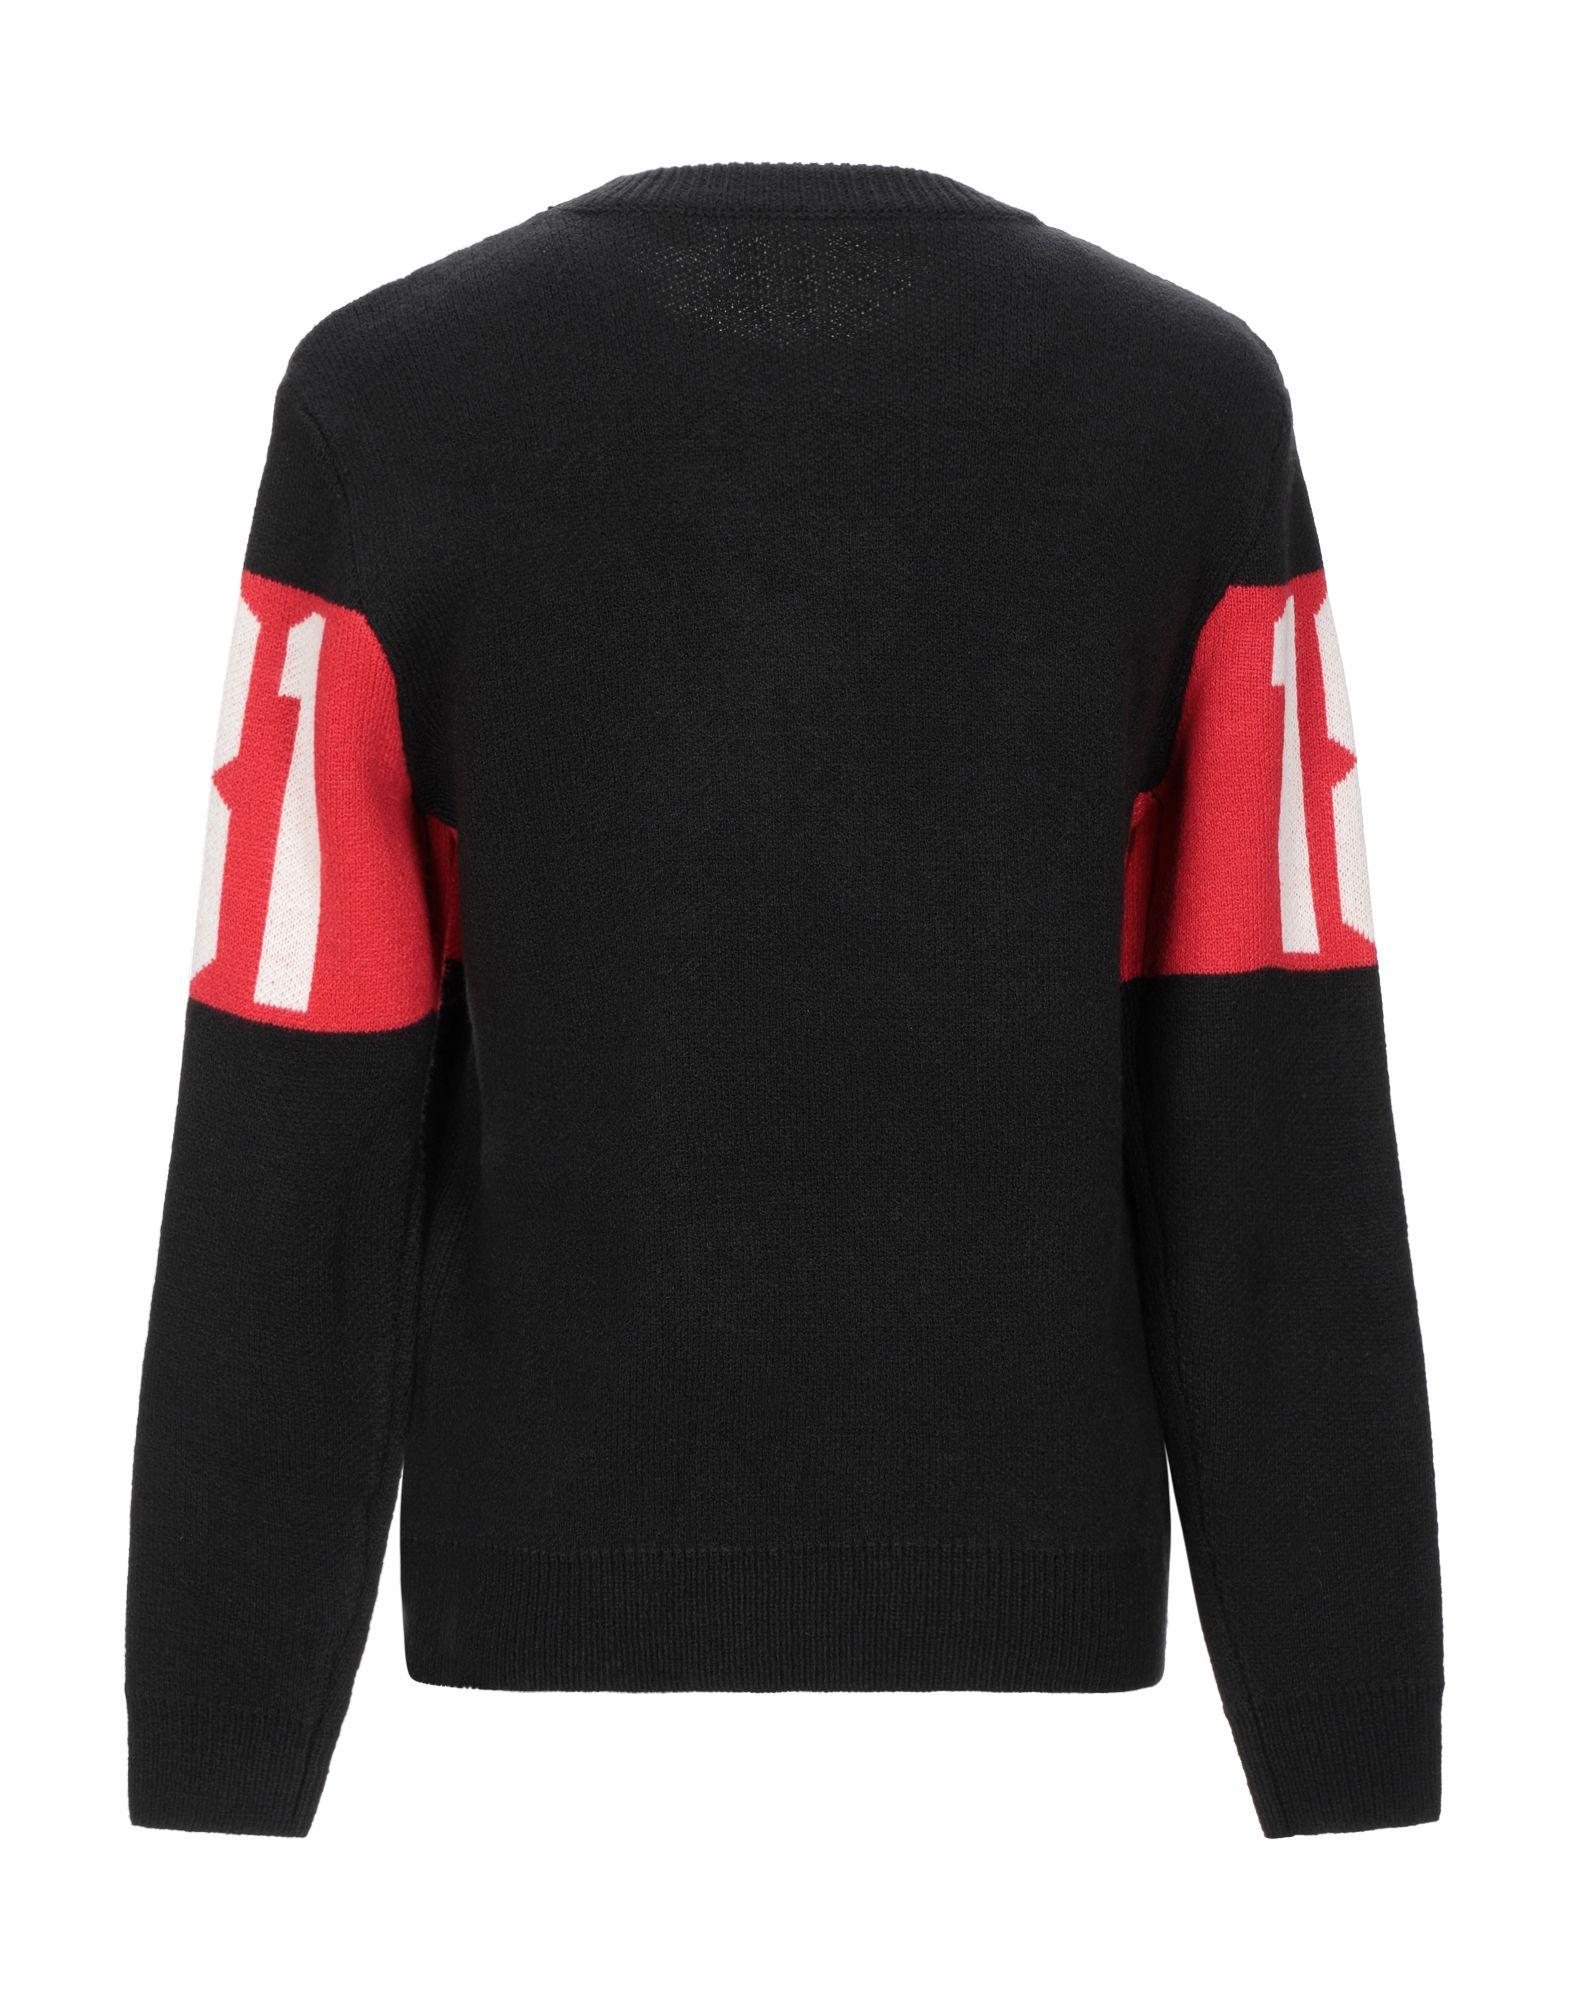 Replay Sweater in Black for Men - Lyst